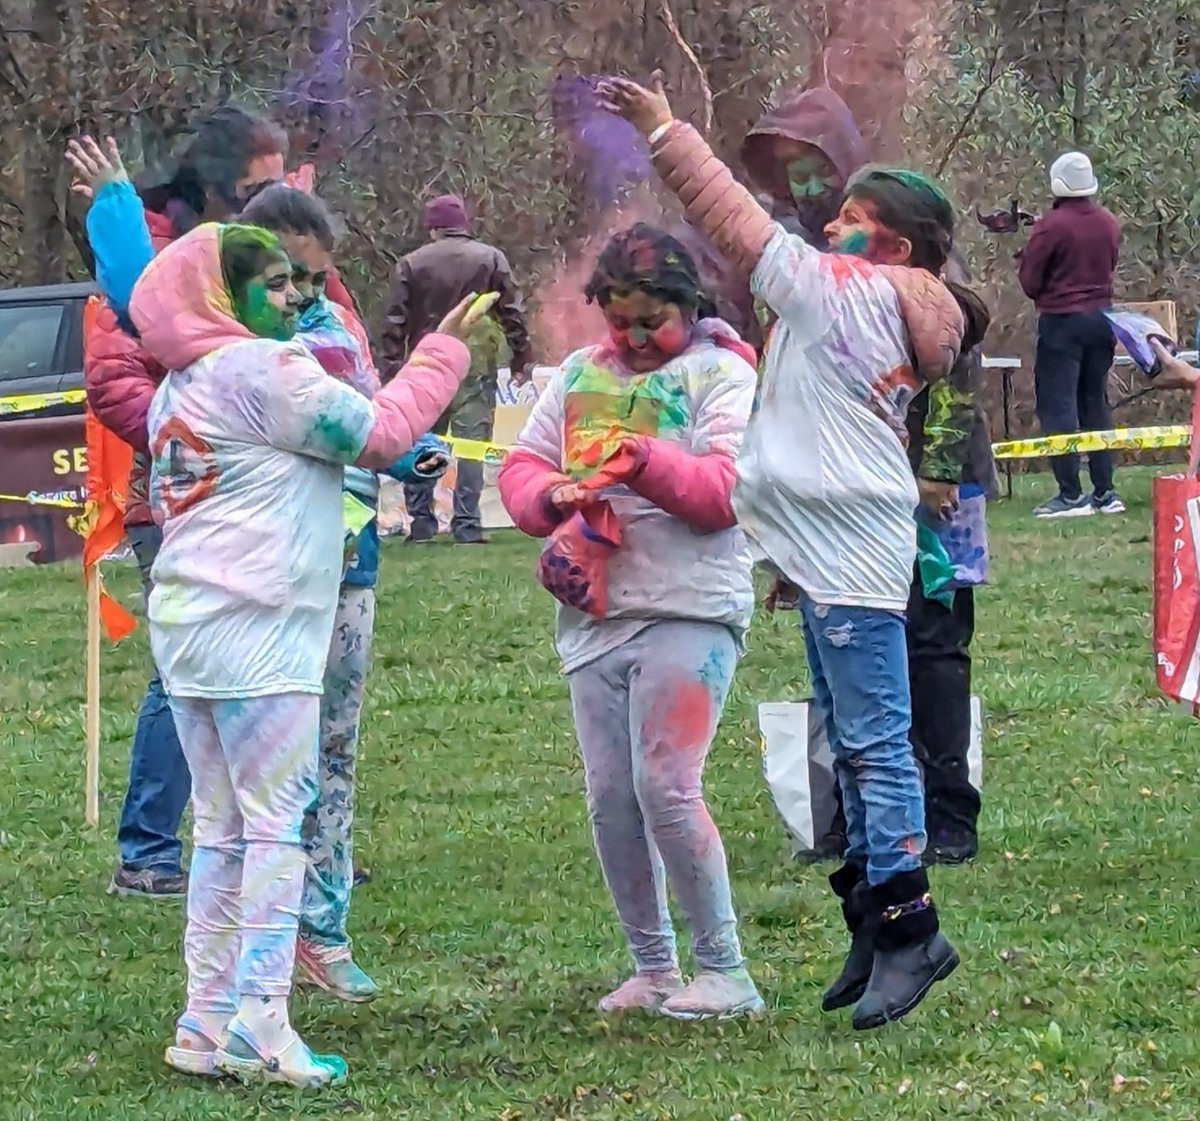 Despite wind and cold, Holi - Festival of Colors, Love and Spring - carried on in South Brunswick Twp. Thank you to the Hindu American Society of Central NJ for inviting FBI Newark to celebrate.